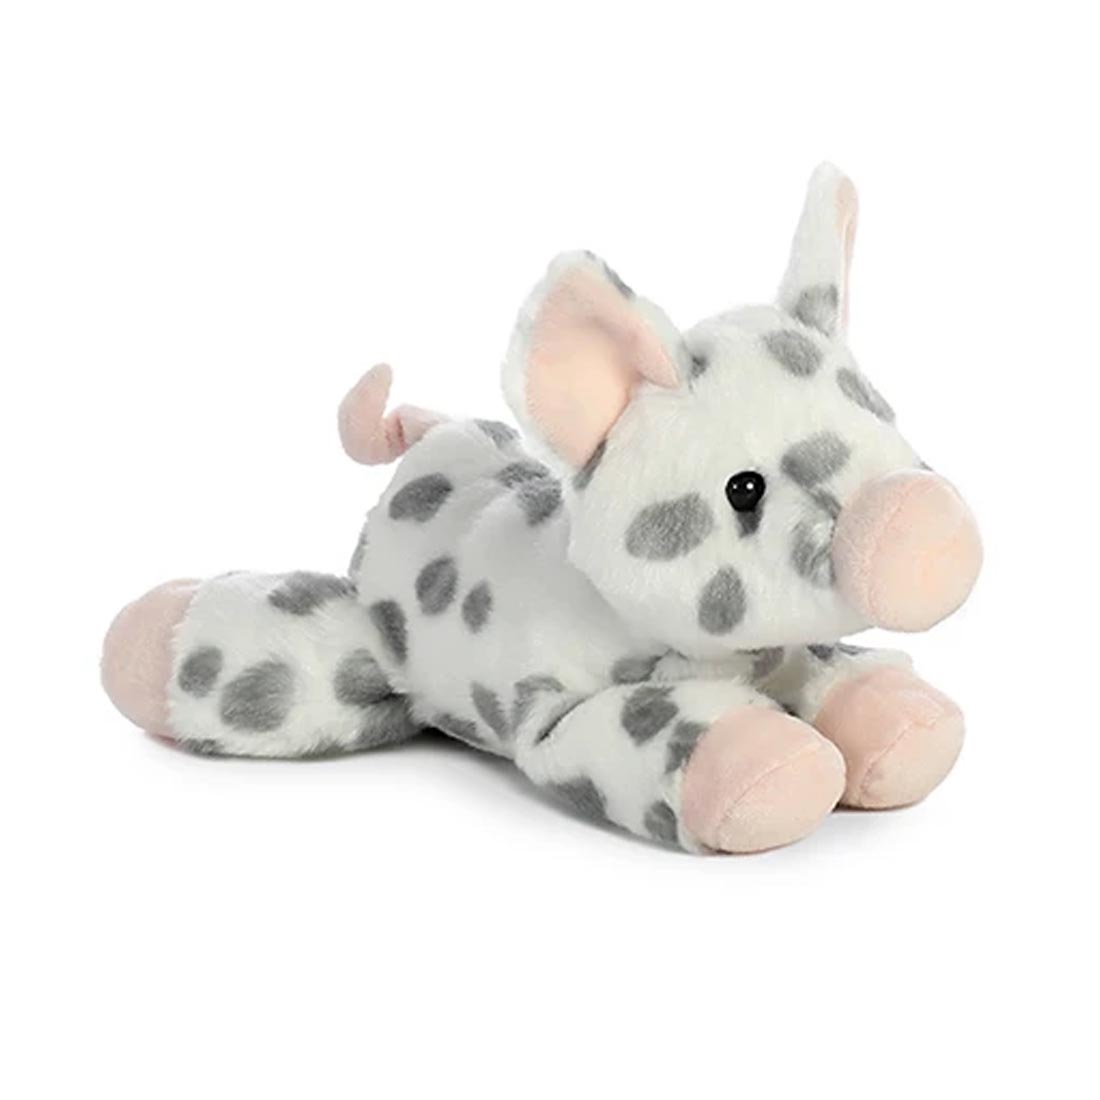 white piglet stuffed animal with gray spots